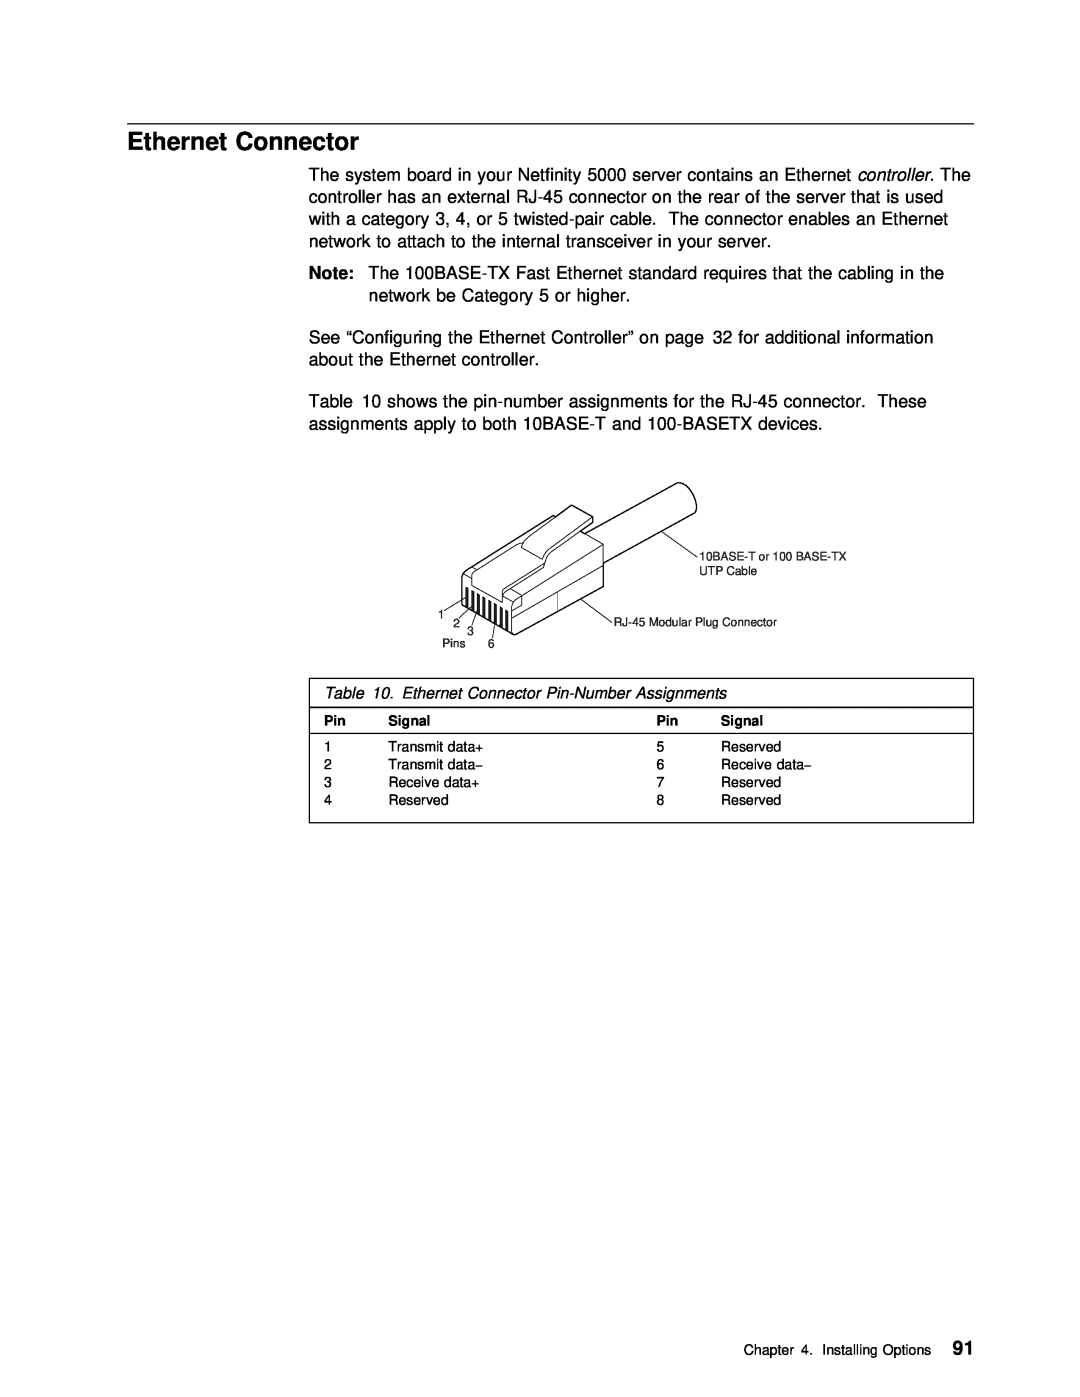 IBM 5000 manual Ethernet Connector Pin-Number Assignments 